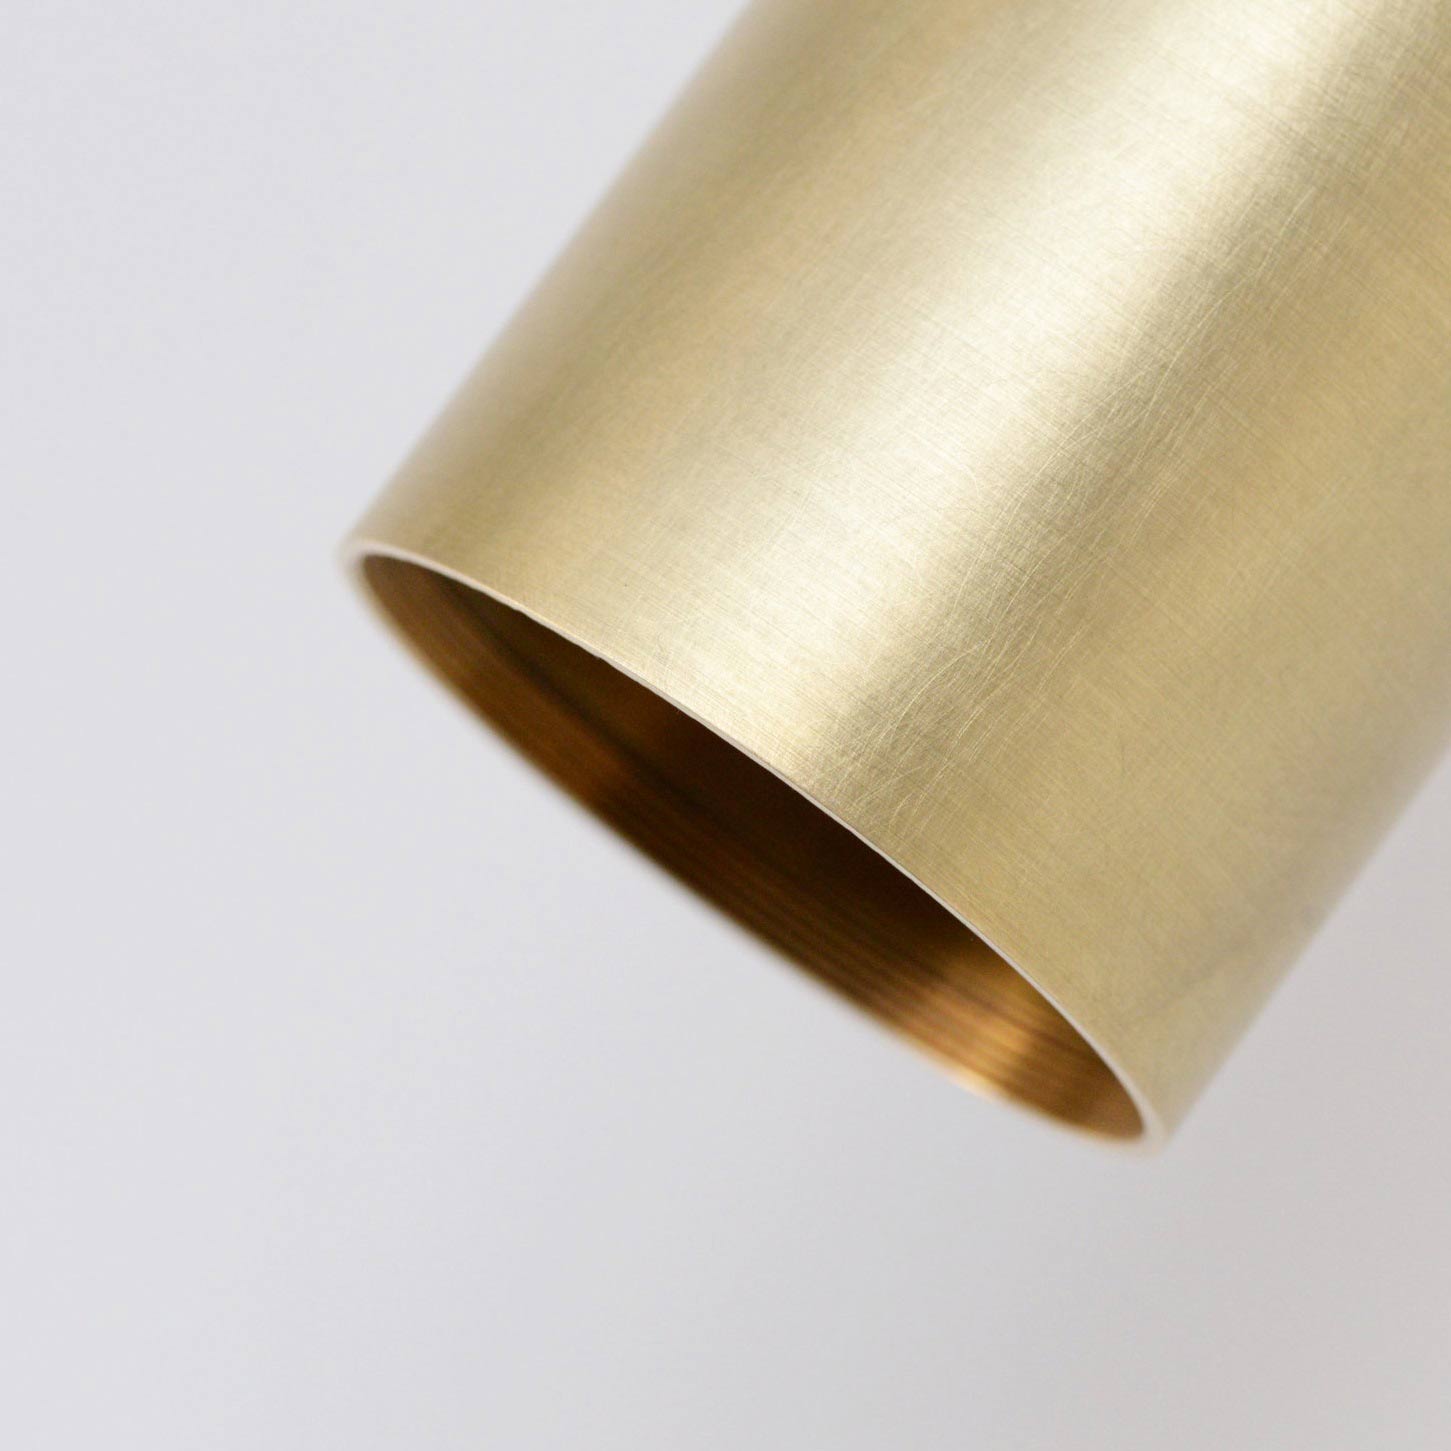 The VIDERE Wall Light head is made from solid brass and supplied by South Charlotte Fine Lighting